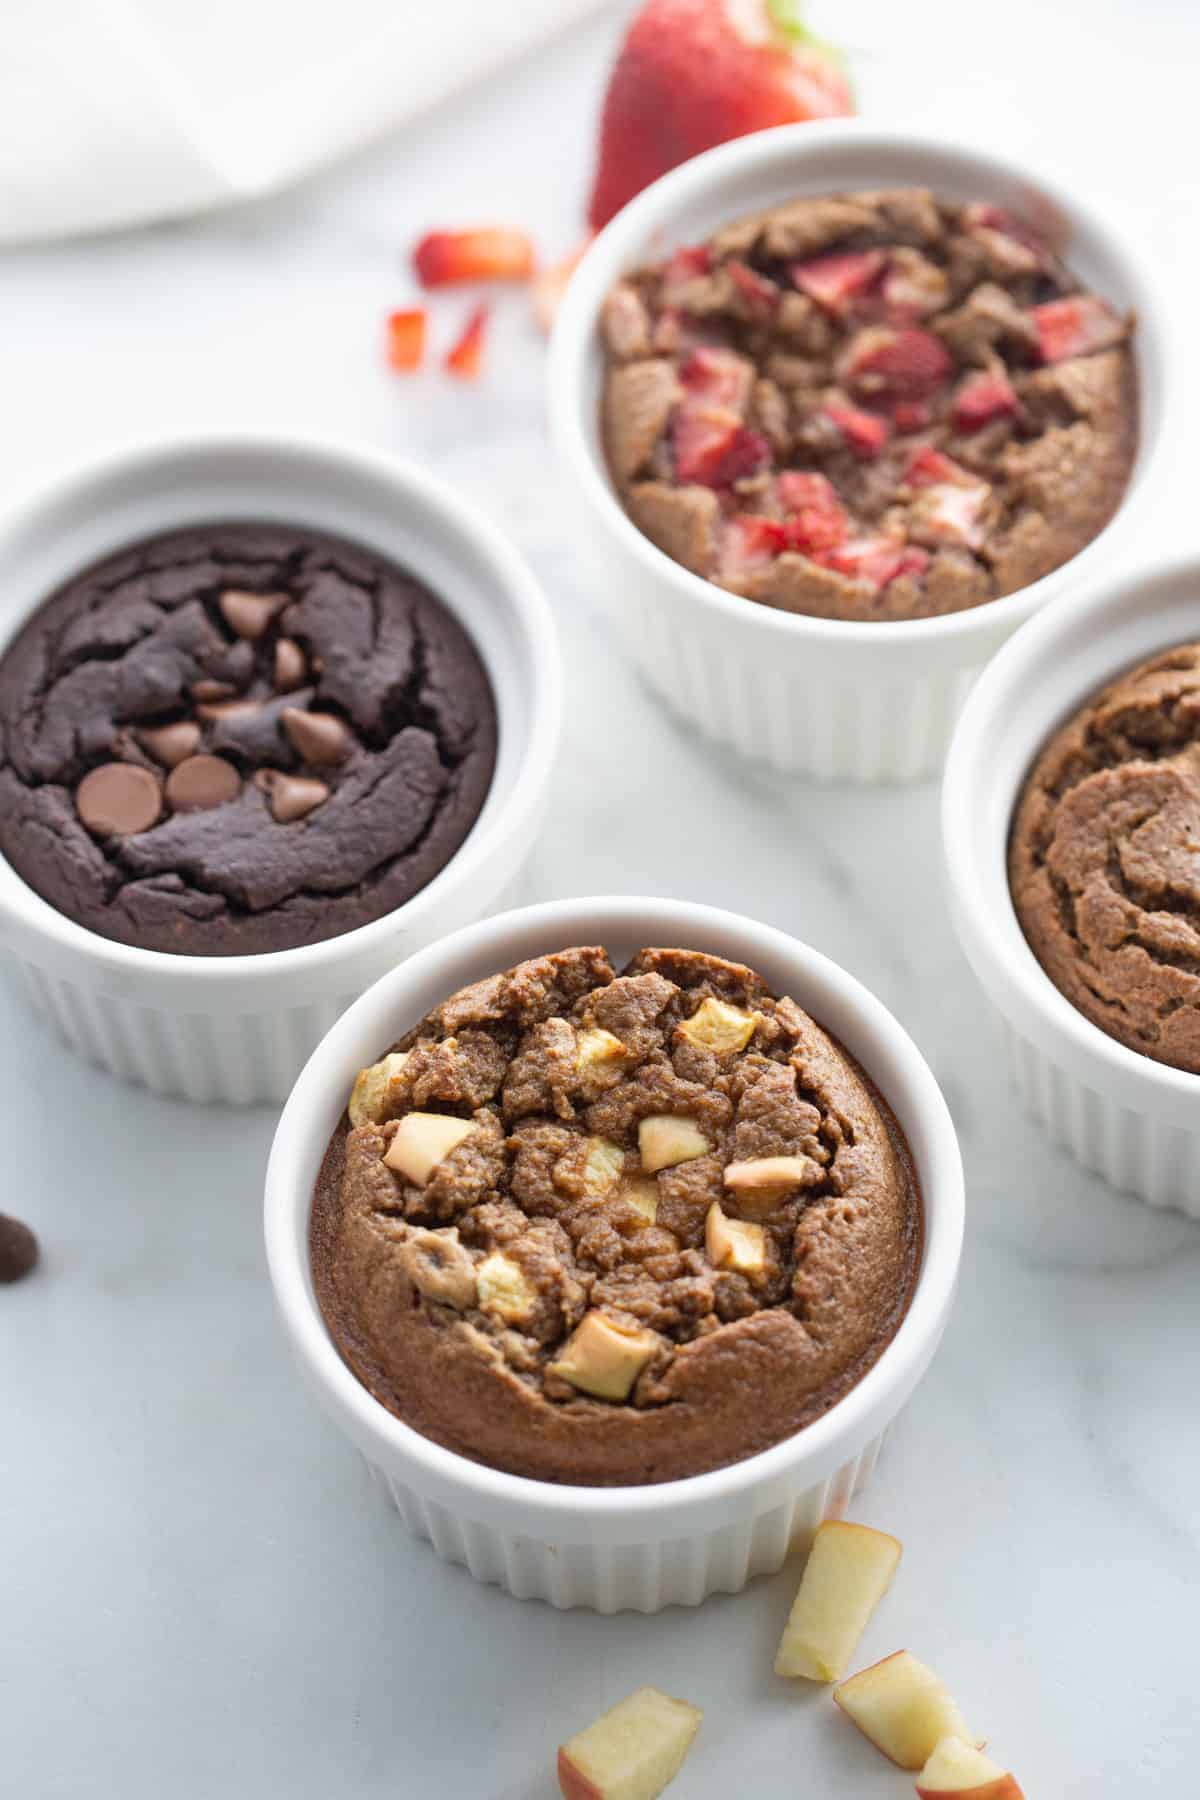 Blender baked oats with different toppings.